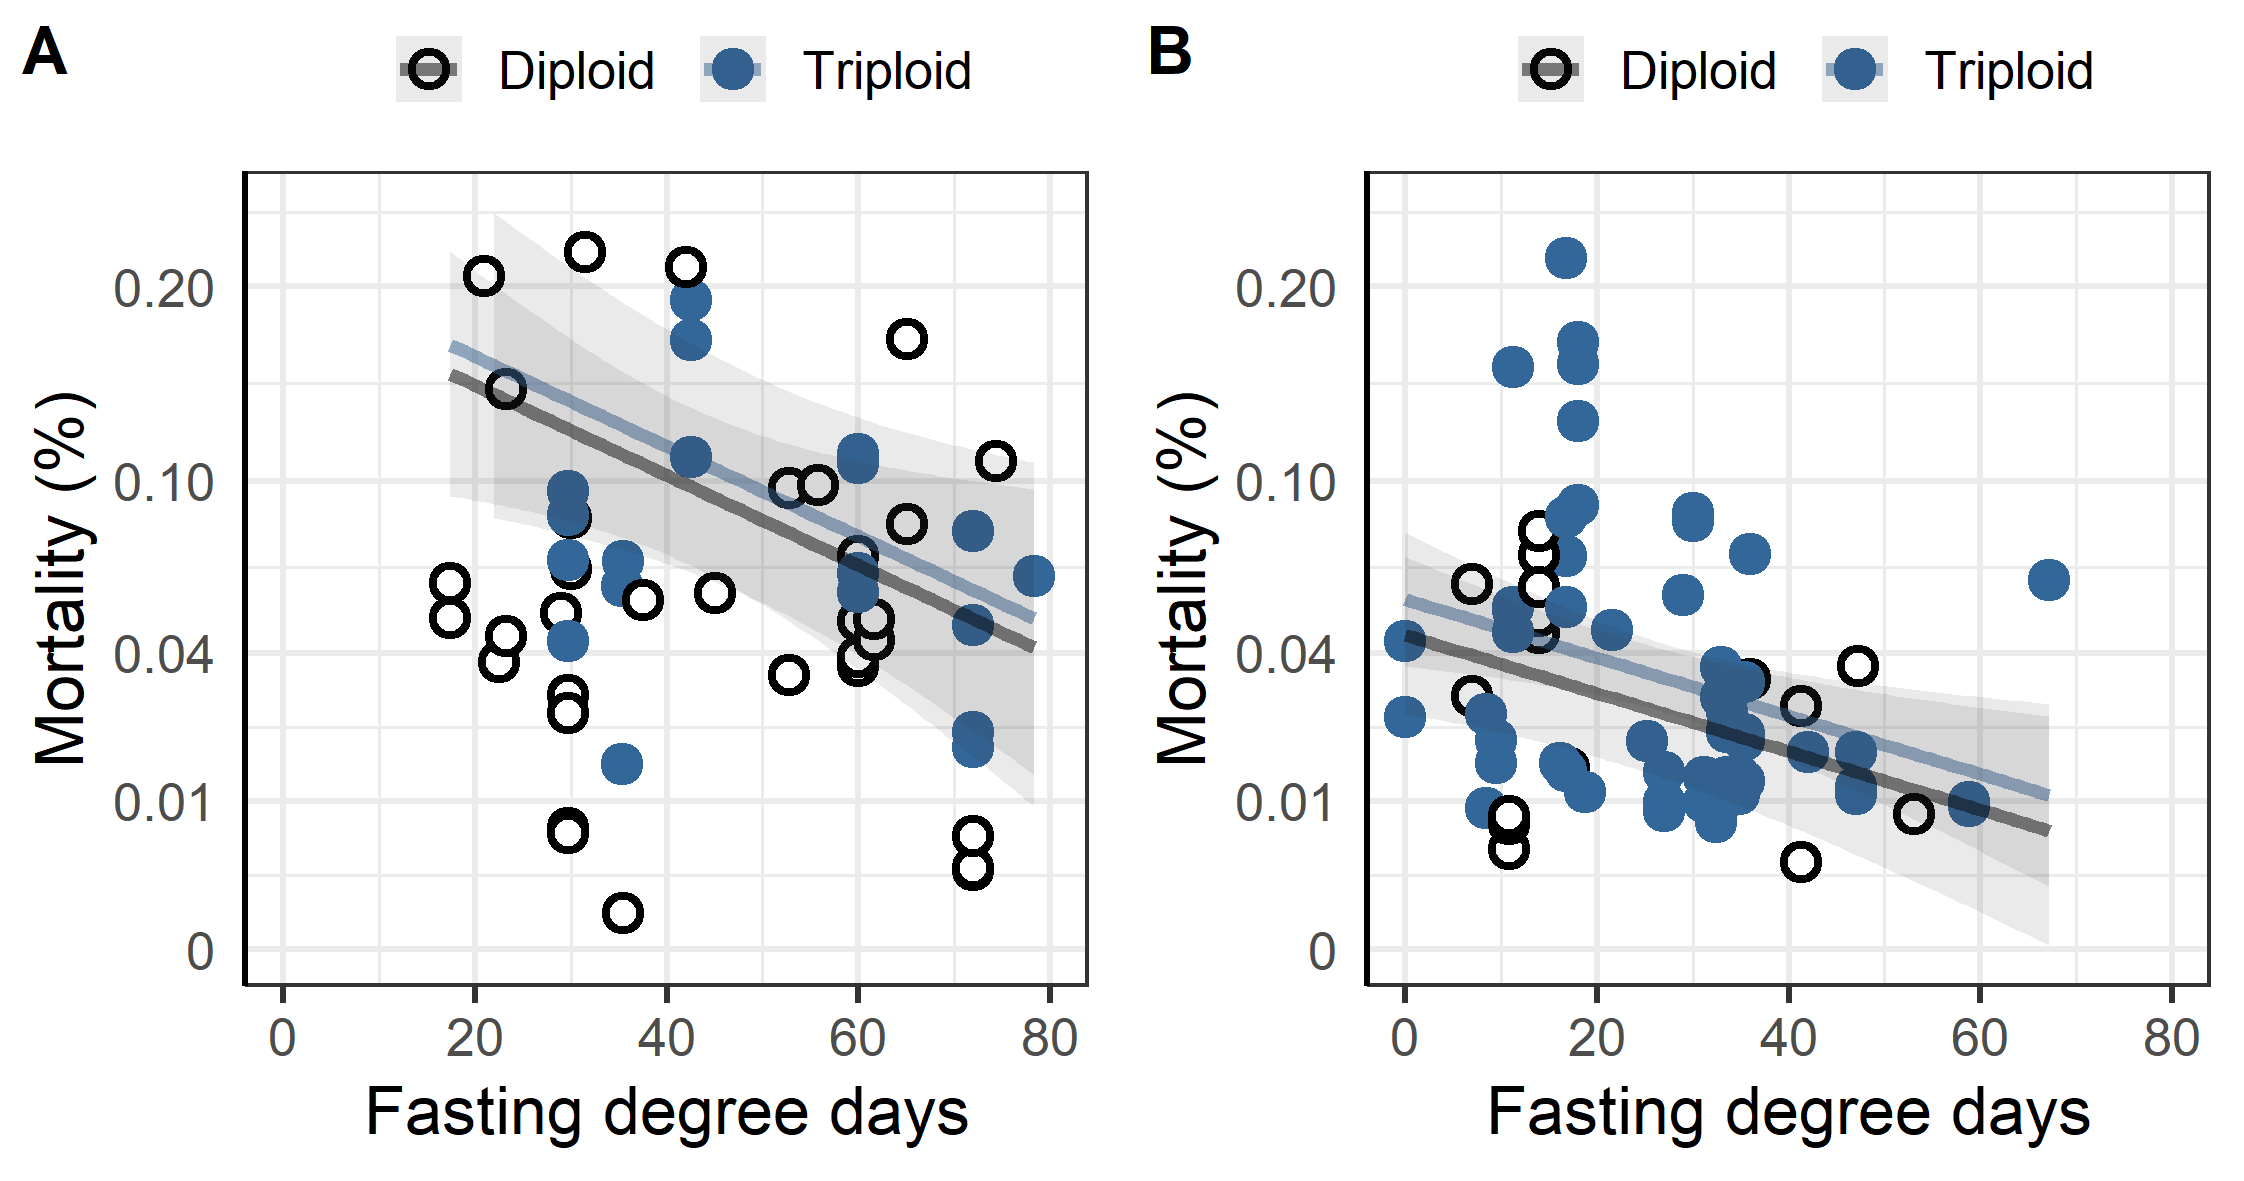 Mortality the week after delousing as a function of fasting